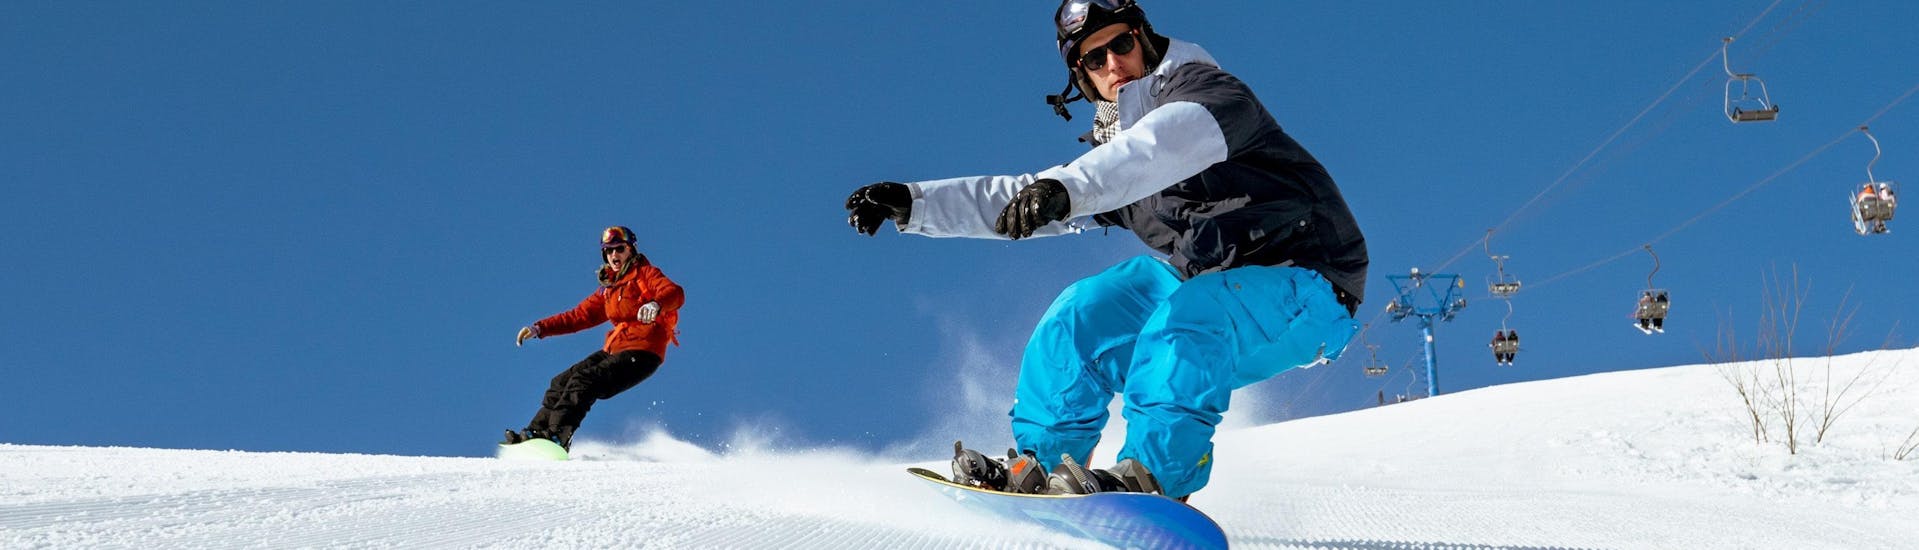 People are doing Private Snowboarding Lessons for All Levels - February with Evolution 2 La Clusaz.